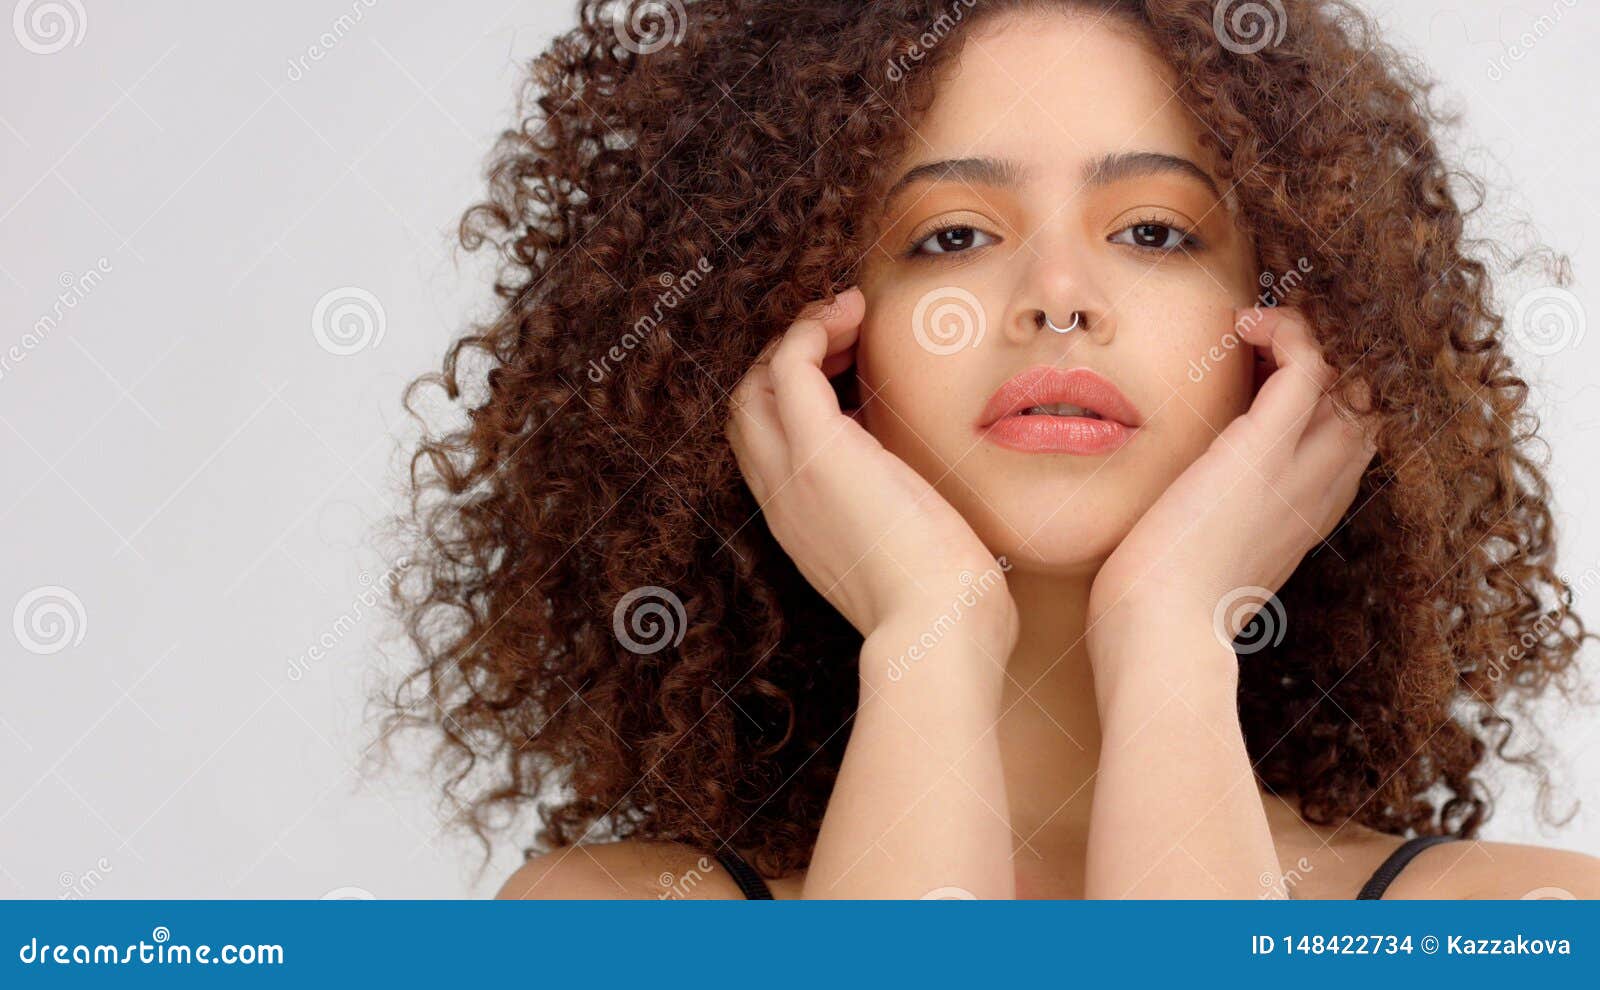 david m chase add mixed girl with freckles photo